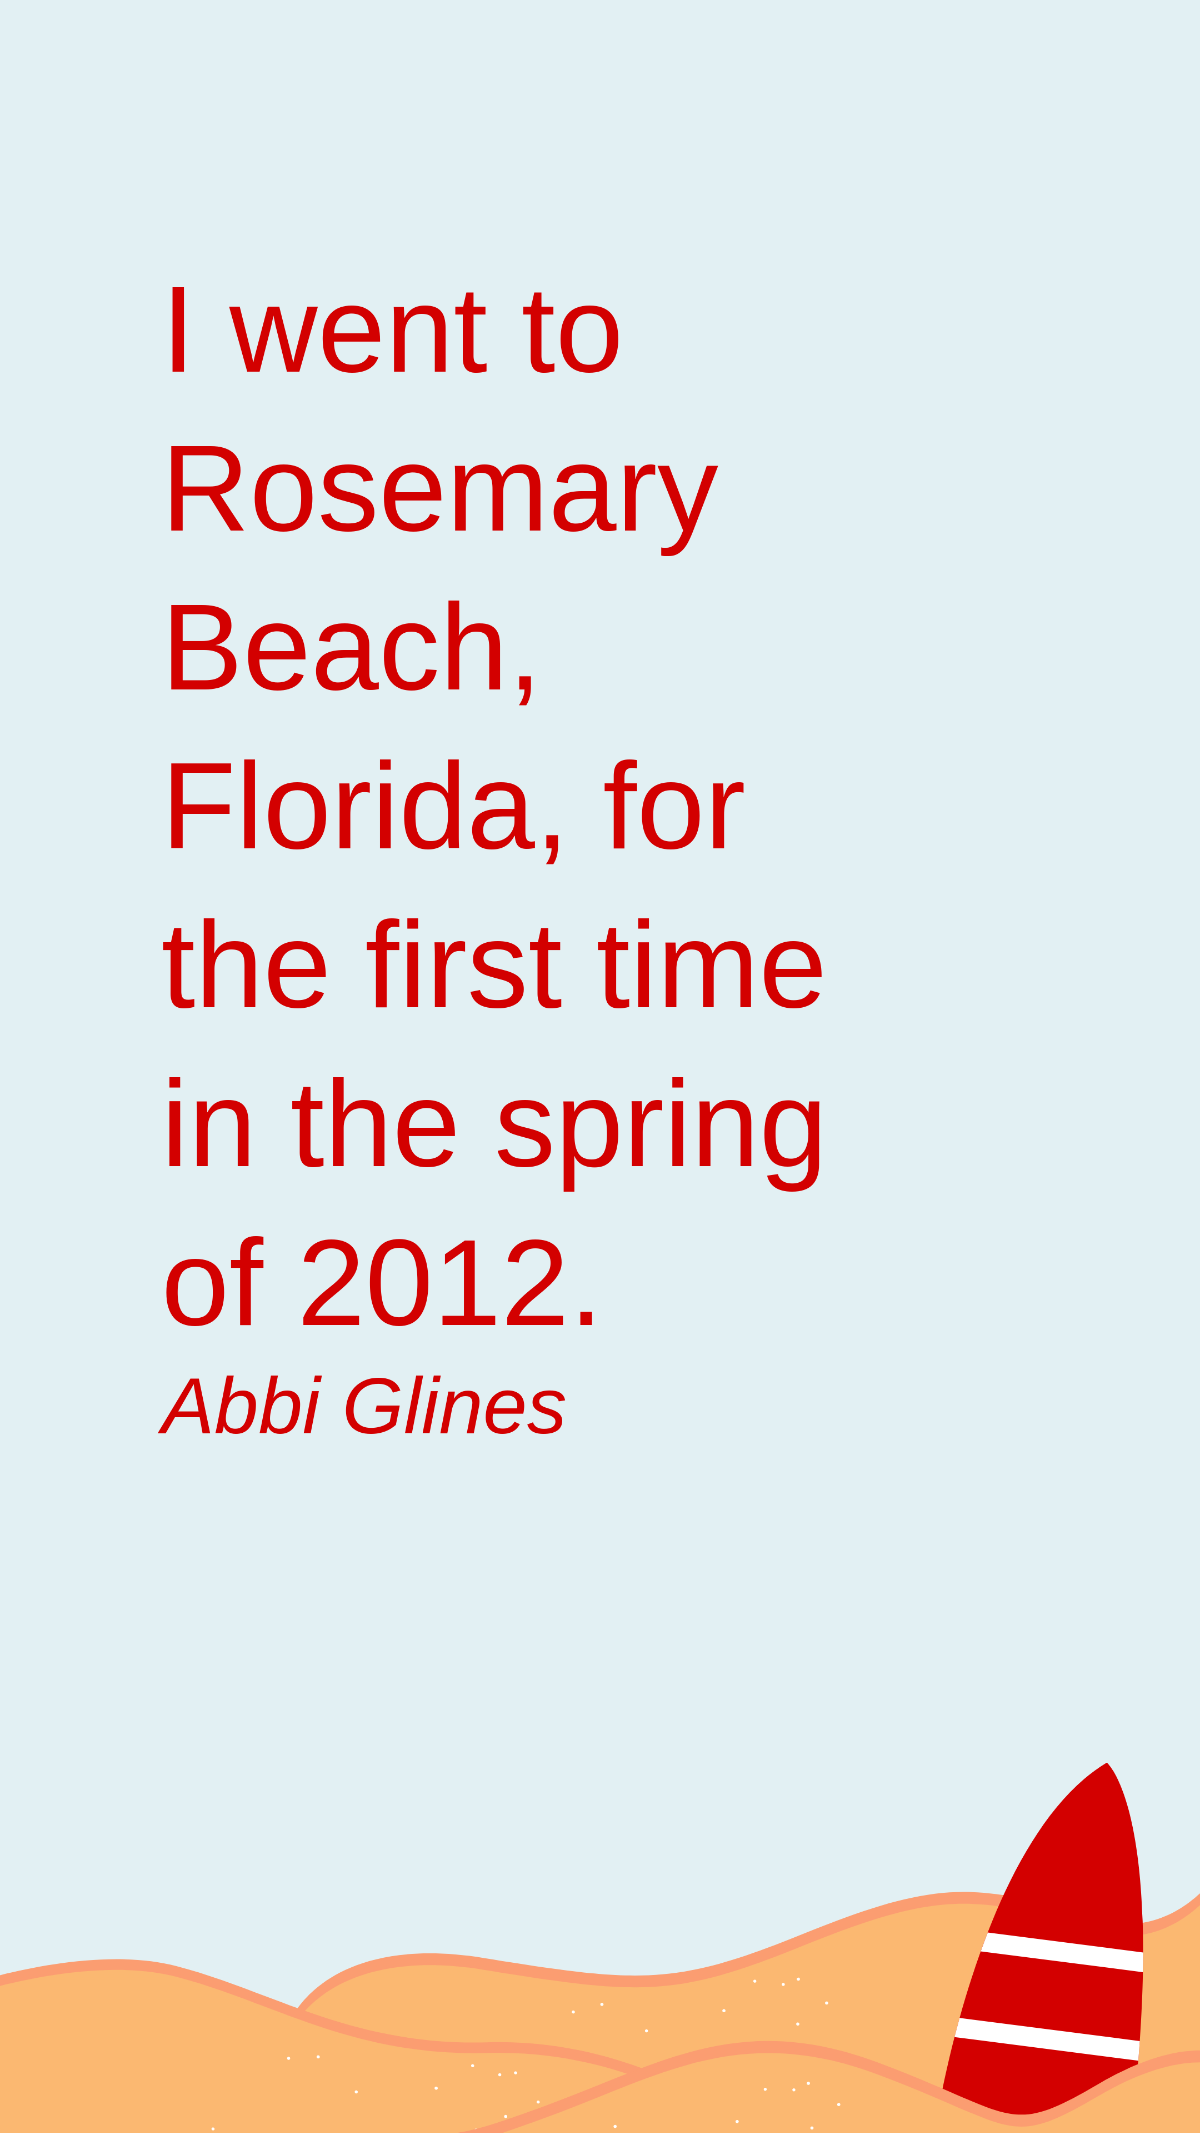 Free Abbi Glines - I went to Rosemary Beach, Florida, for the first time in the spring of 2012. Template